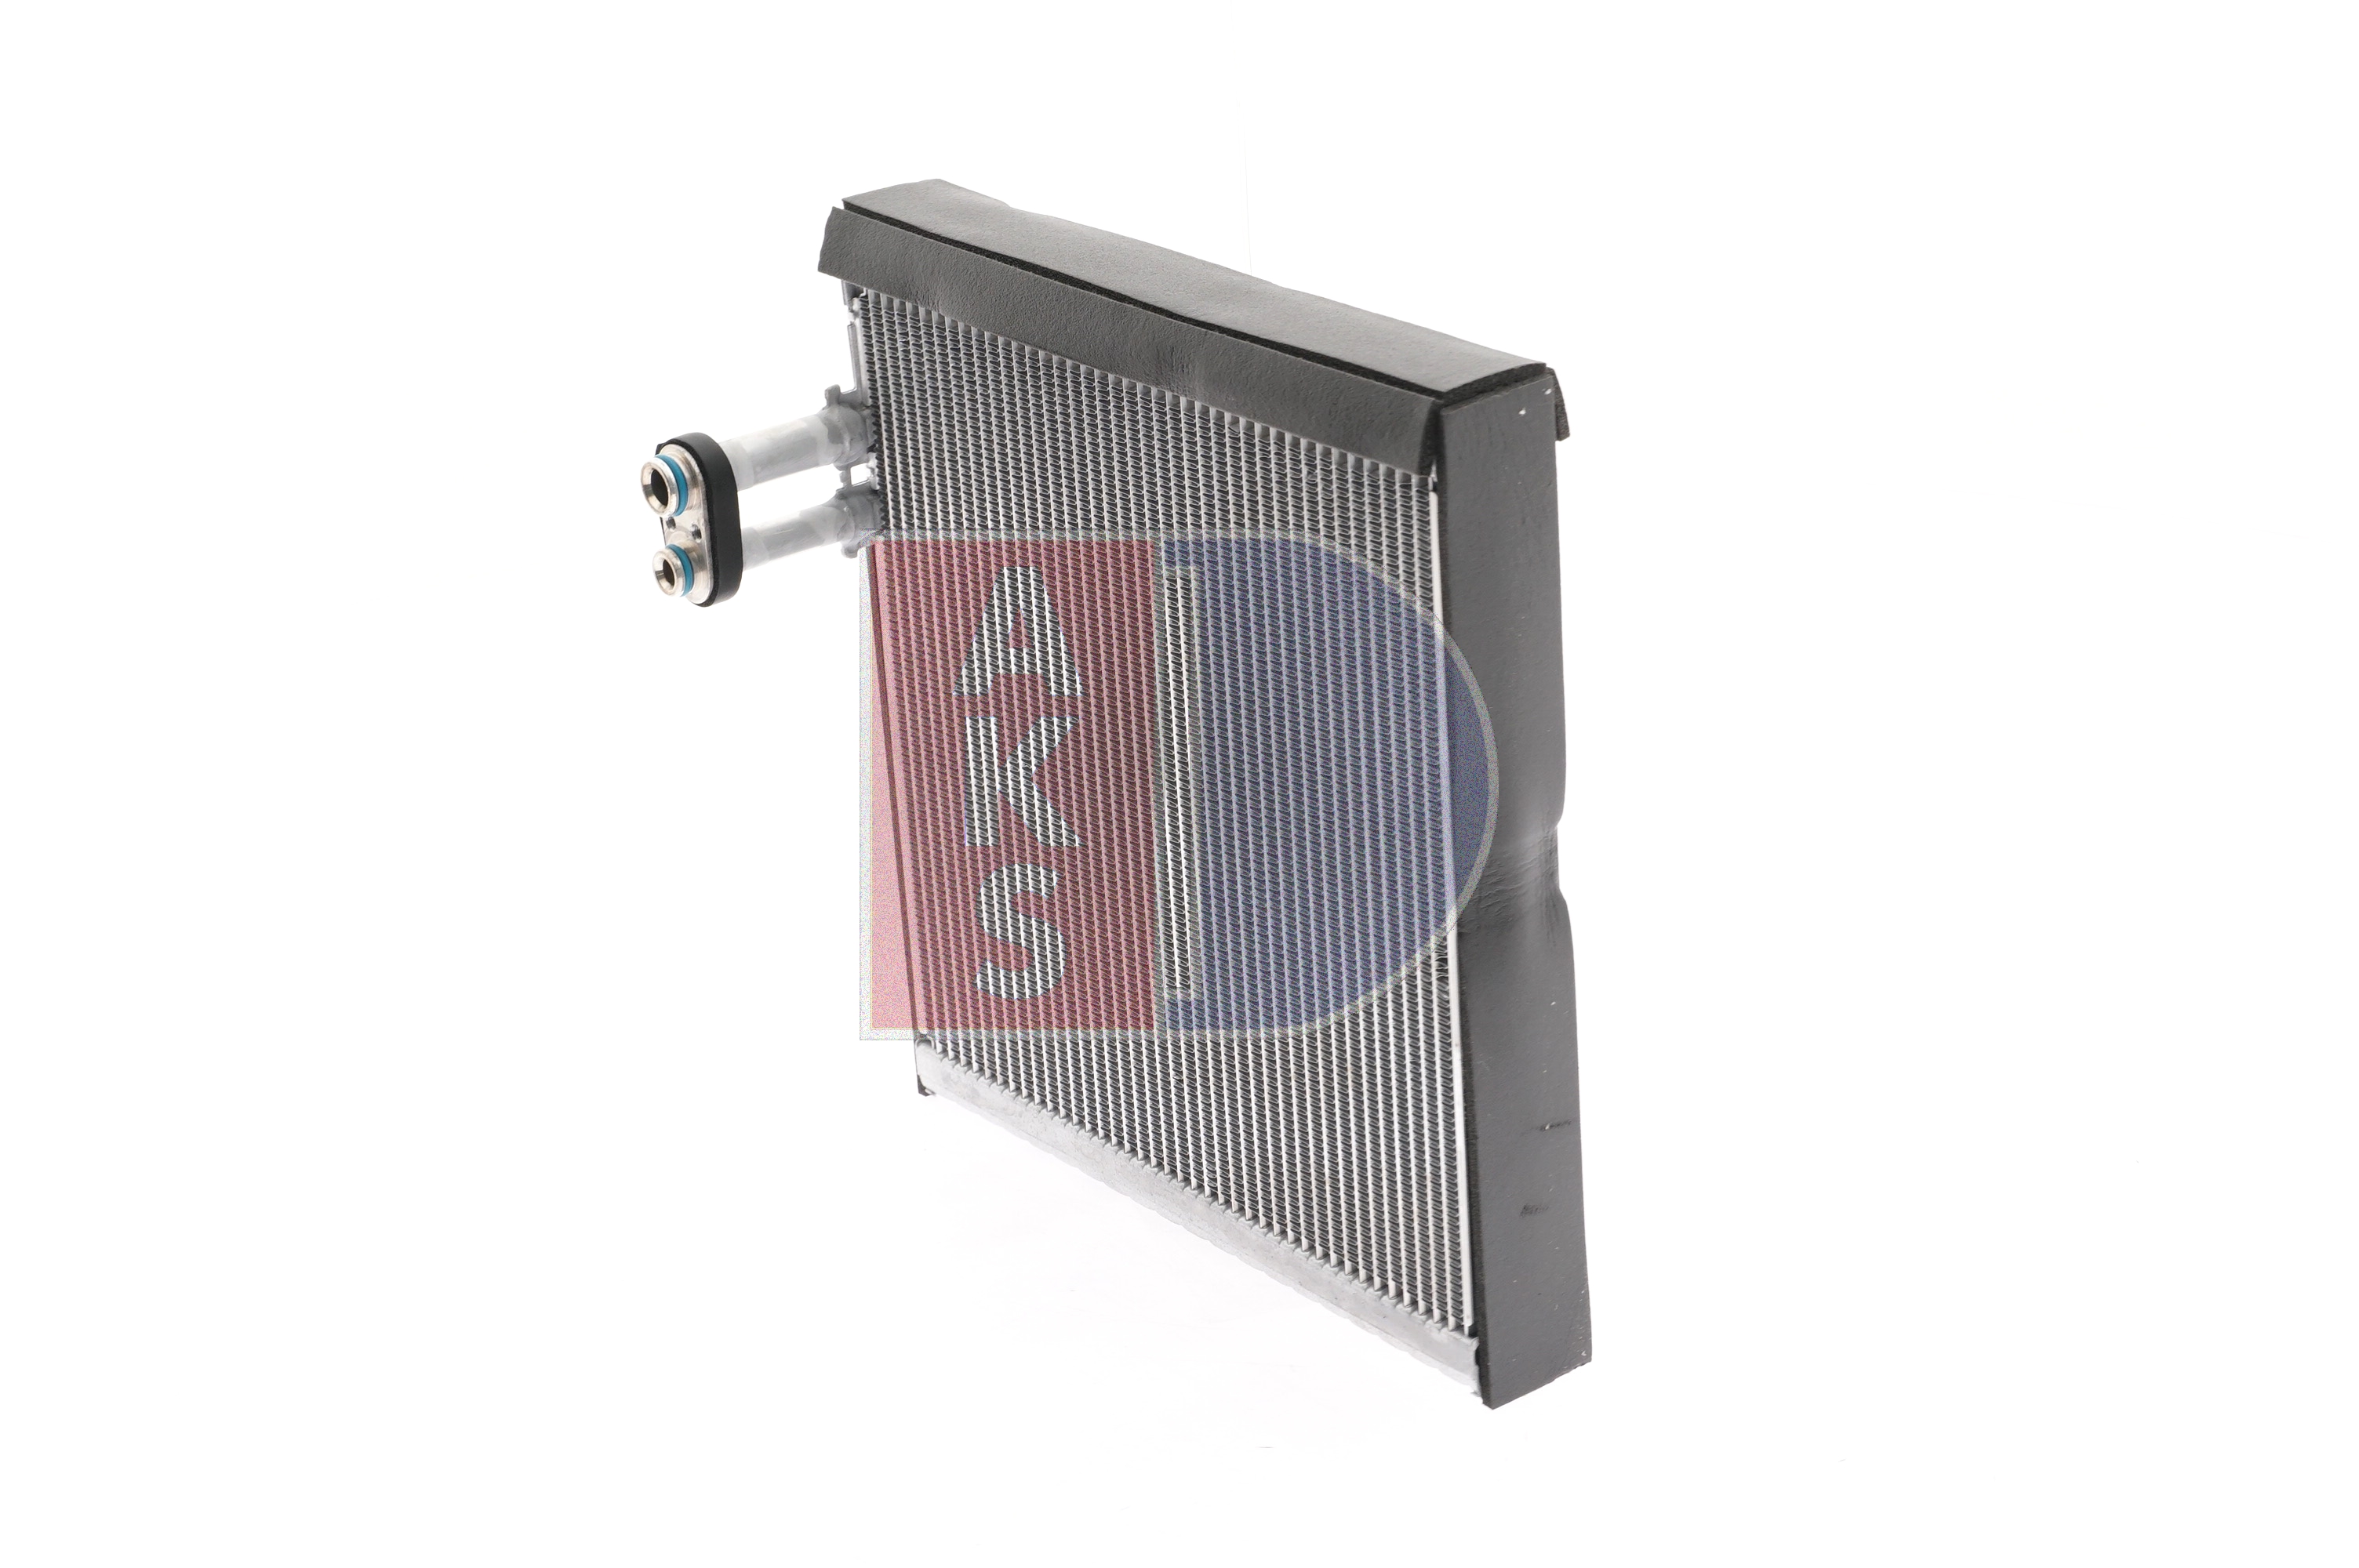 Toyota Air conditioning evaporator AKS DASIS 820323N at a good price